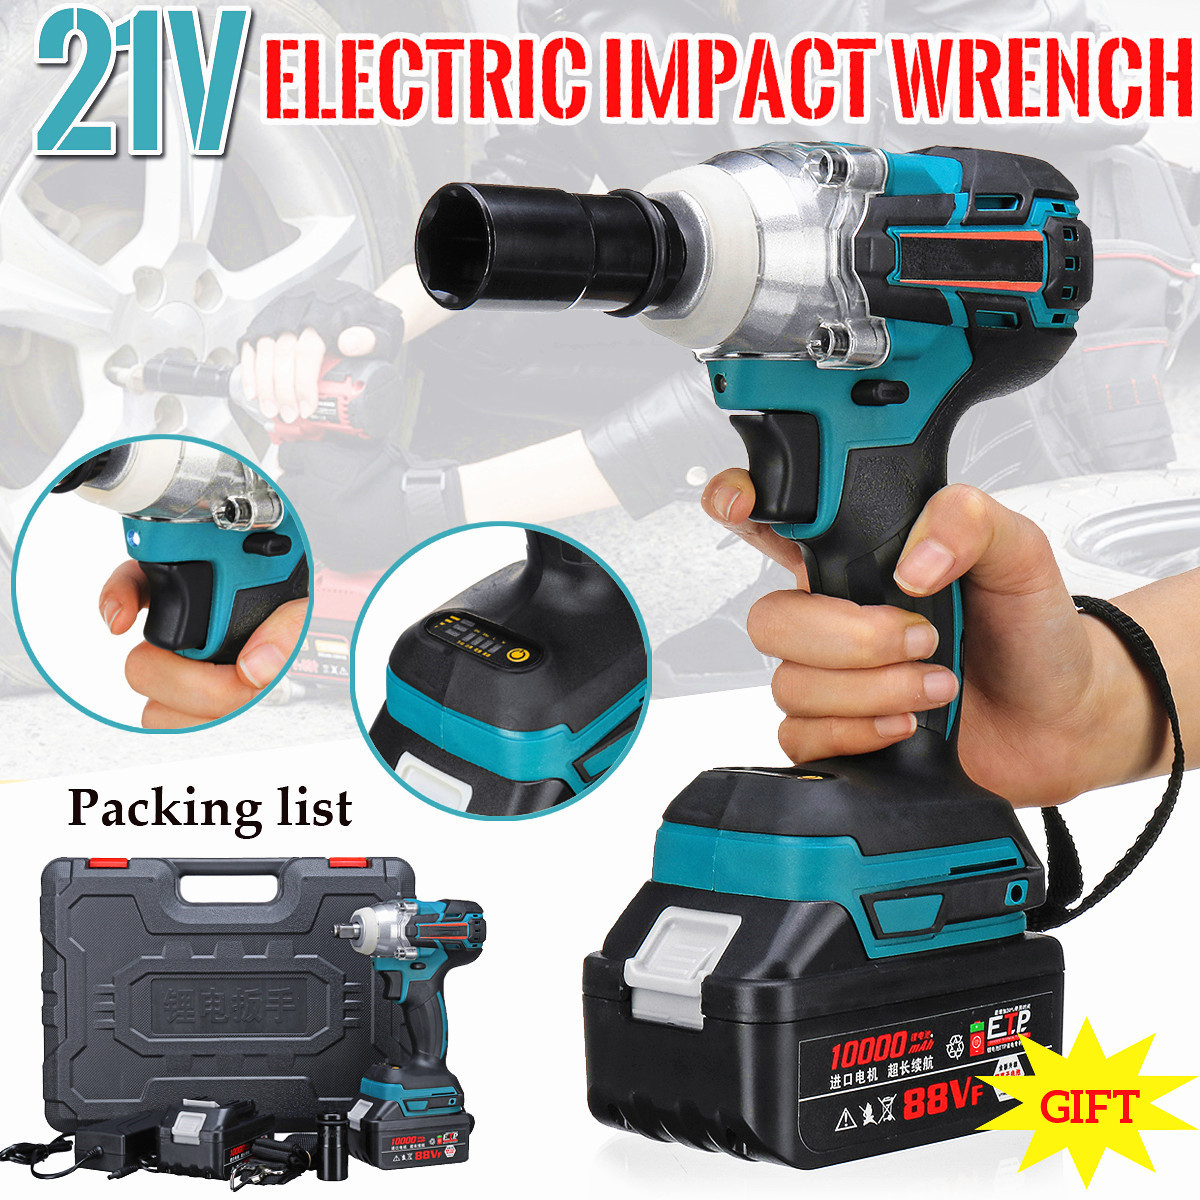 21V-330Nm-10000mAh-Lithium-Electric-Impact-Wrench-Cordless-with-2-Batteries-1399342-1